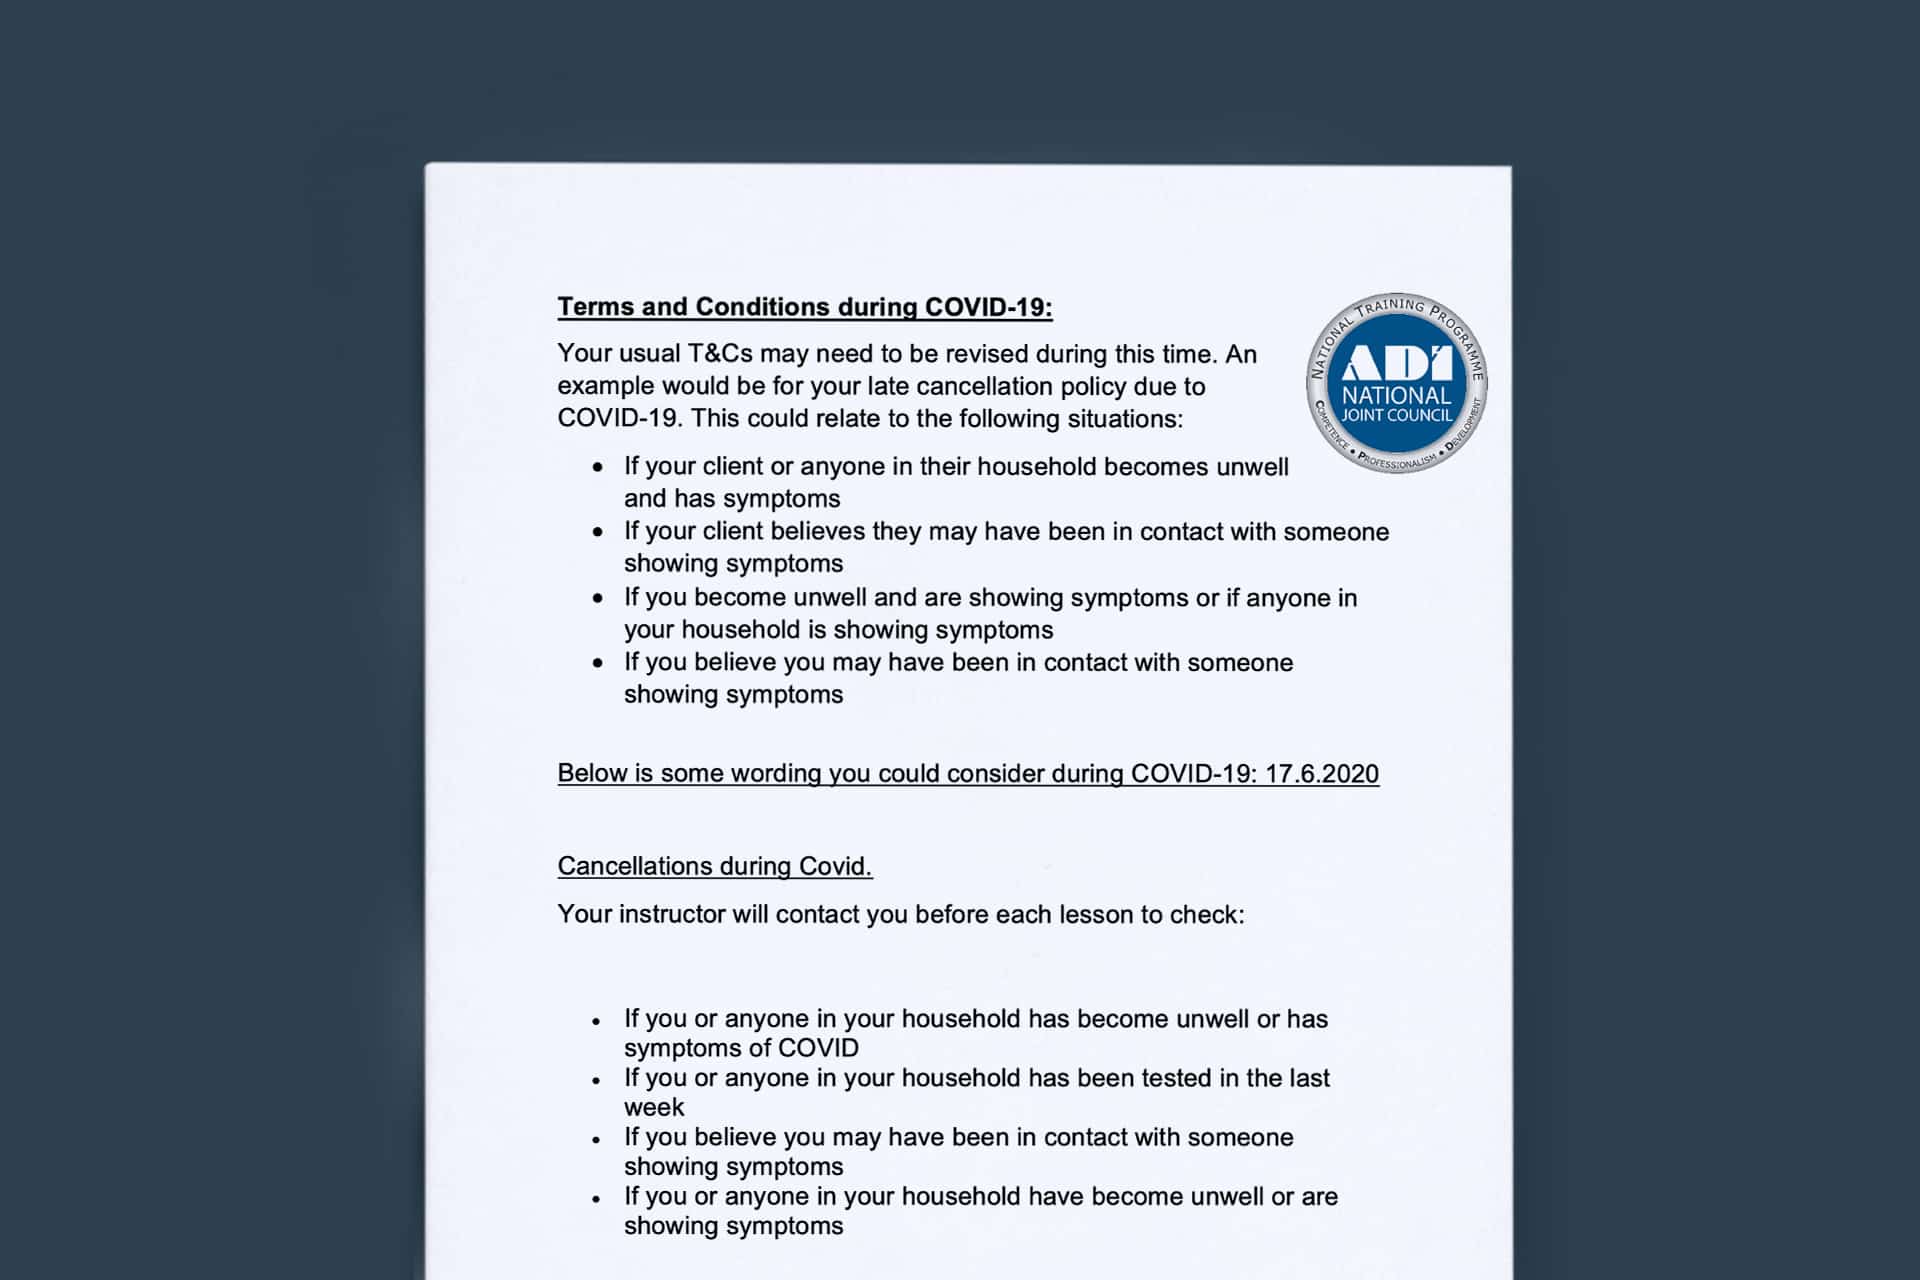 Terms and Conditions during COVID-19